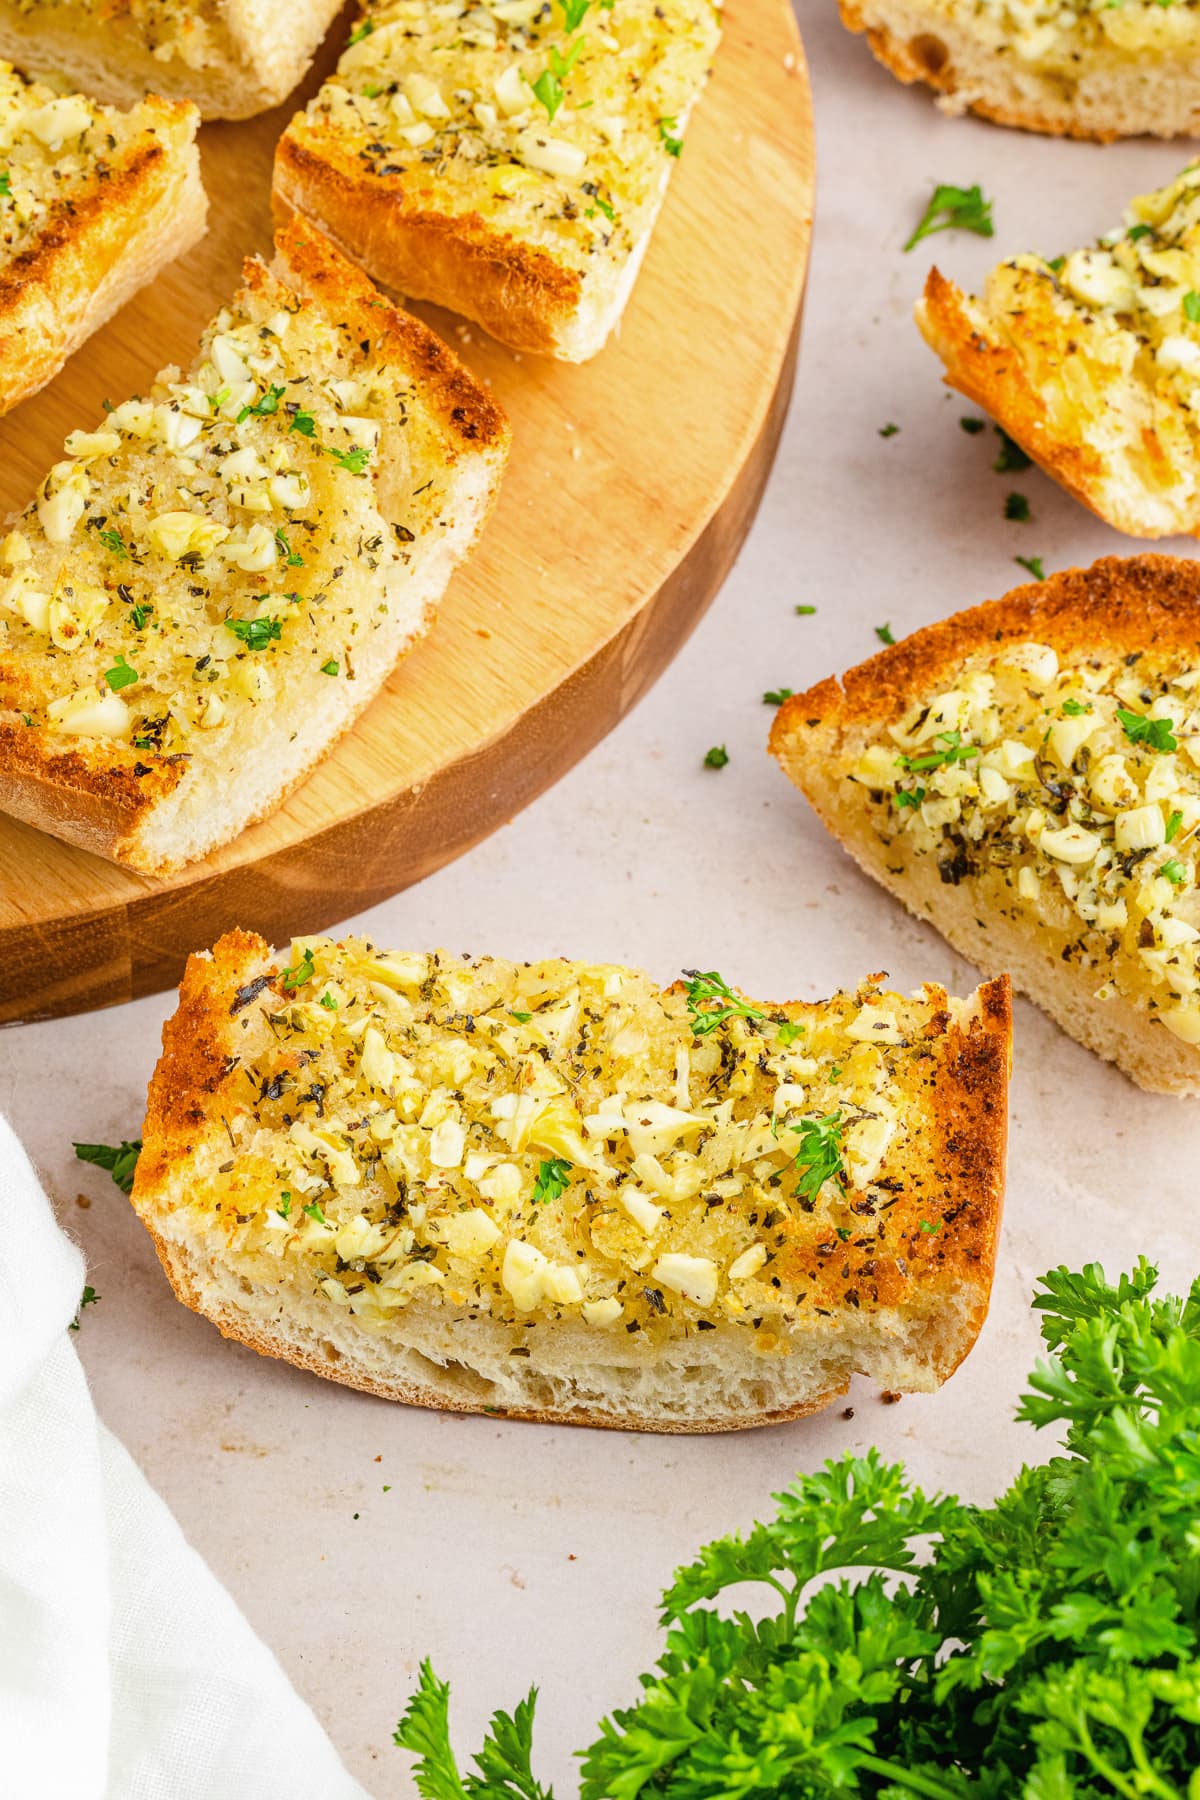 garlic bread sliced and scattered around.